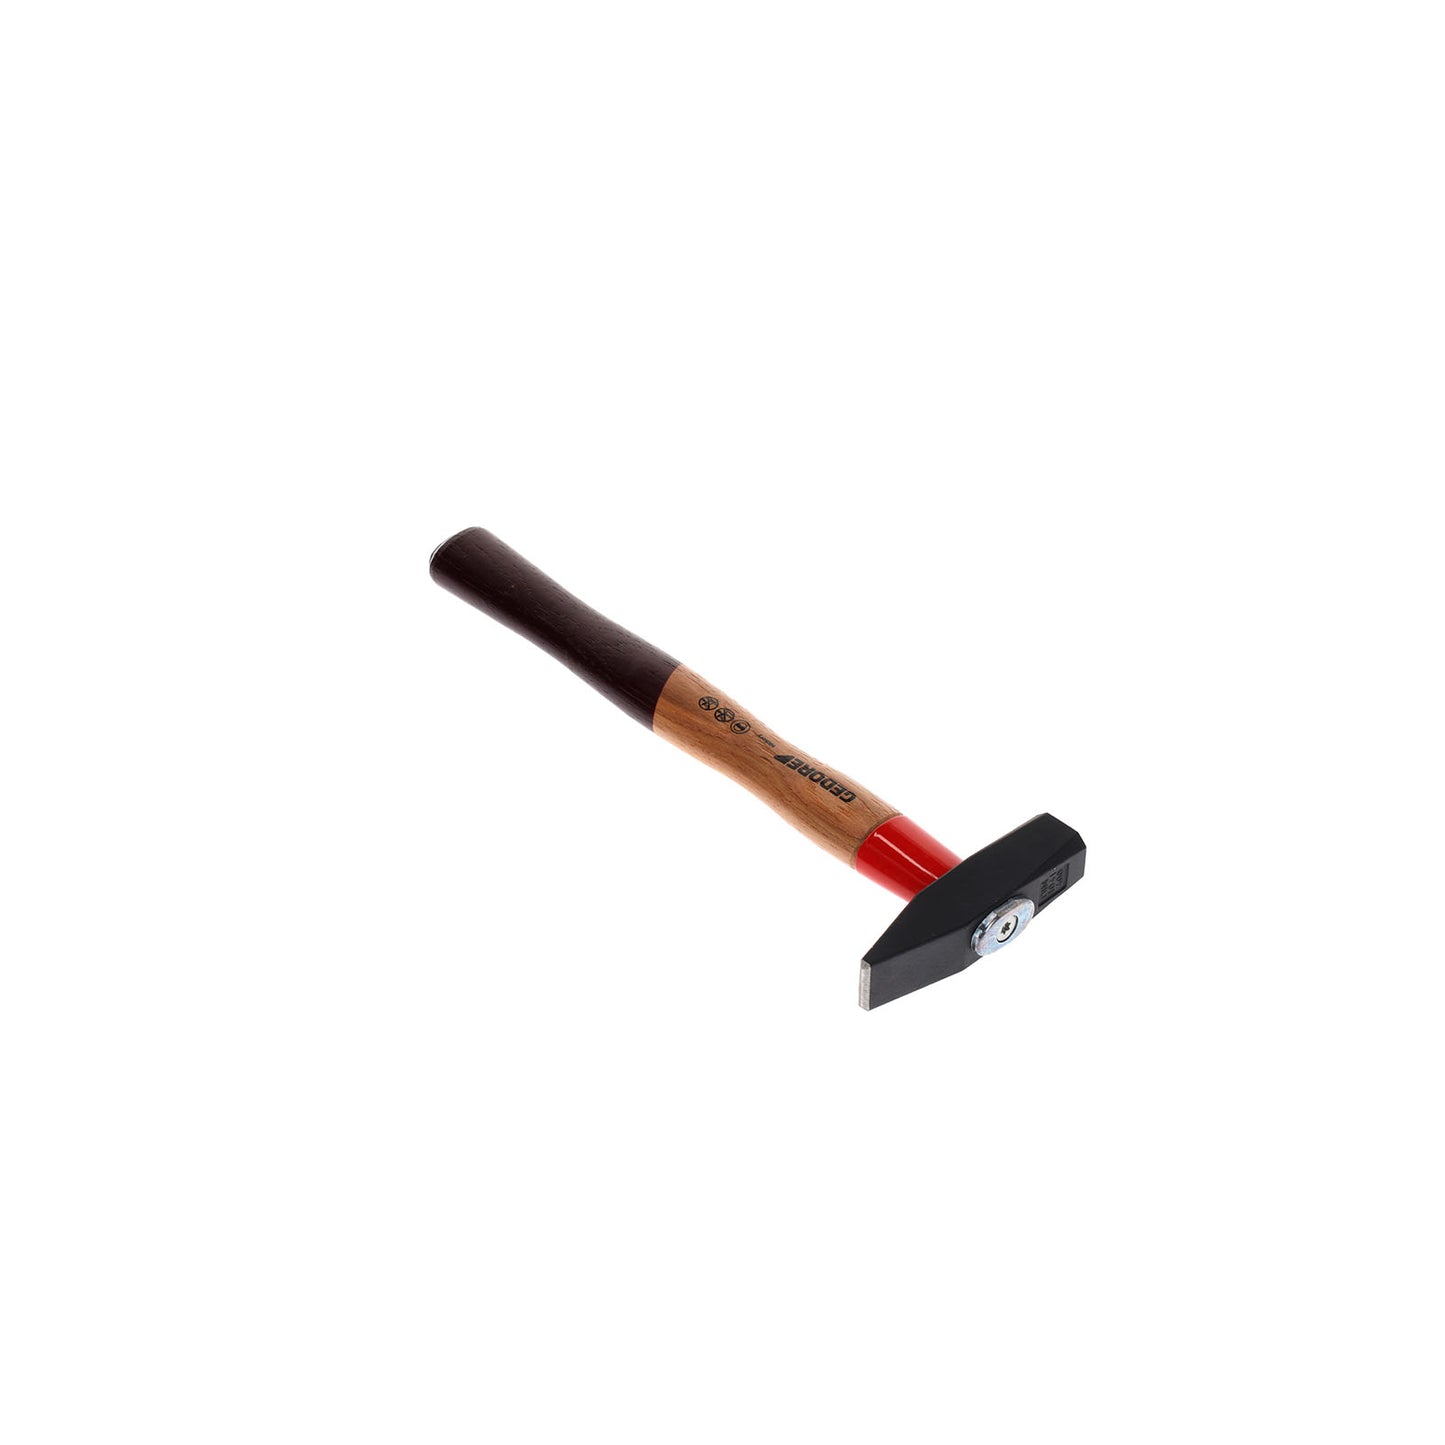 GEDORE 600 H-400 - ROTBAND assembly hammer 400g (8583150)